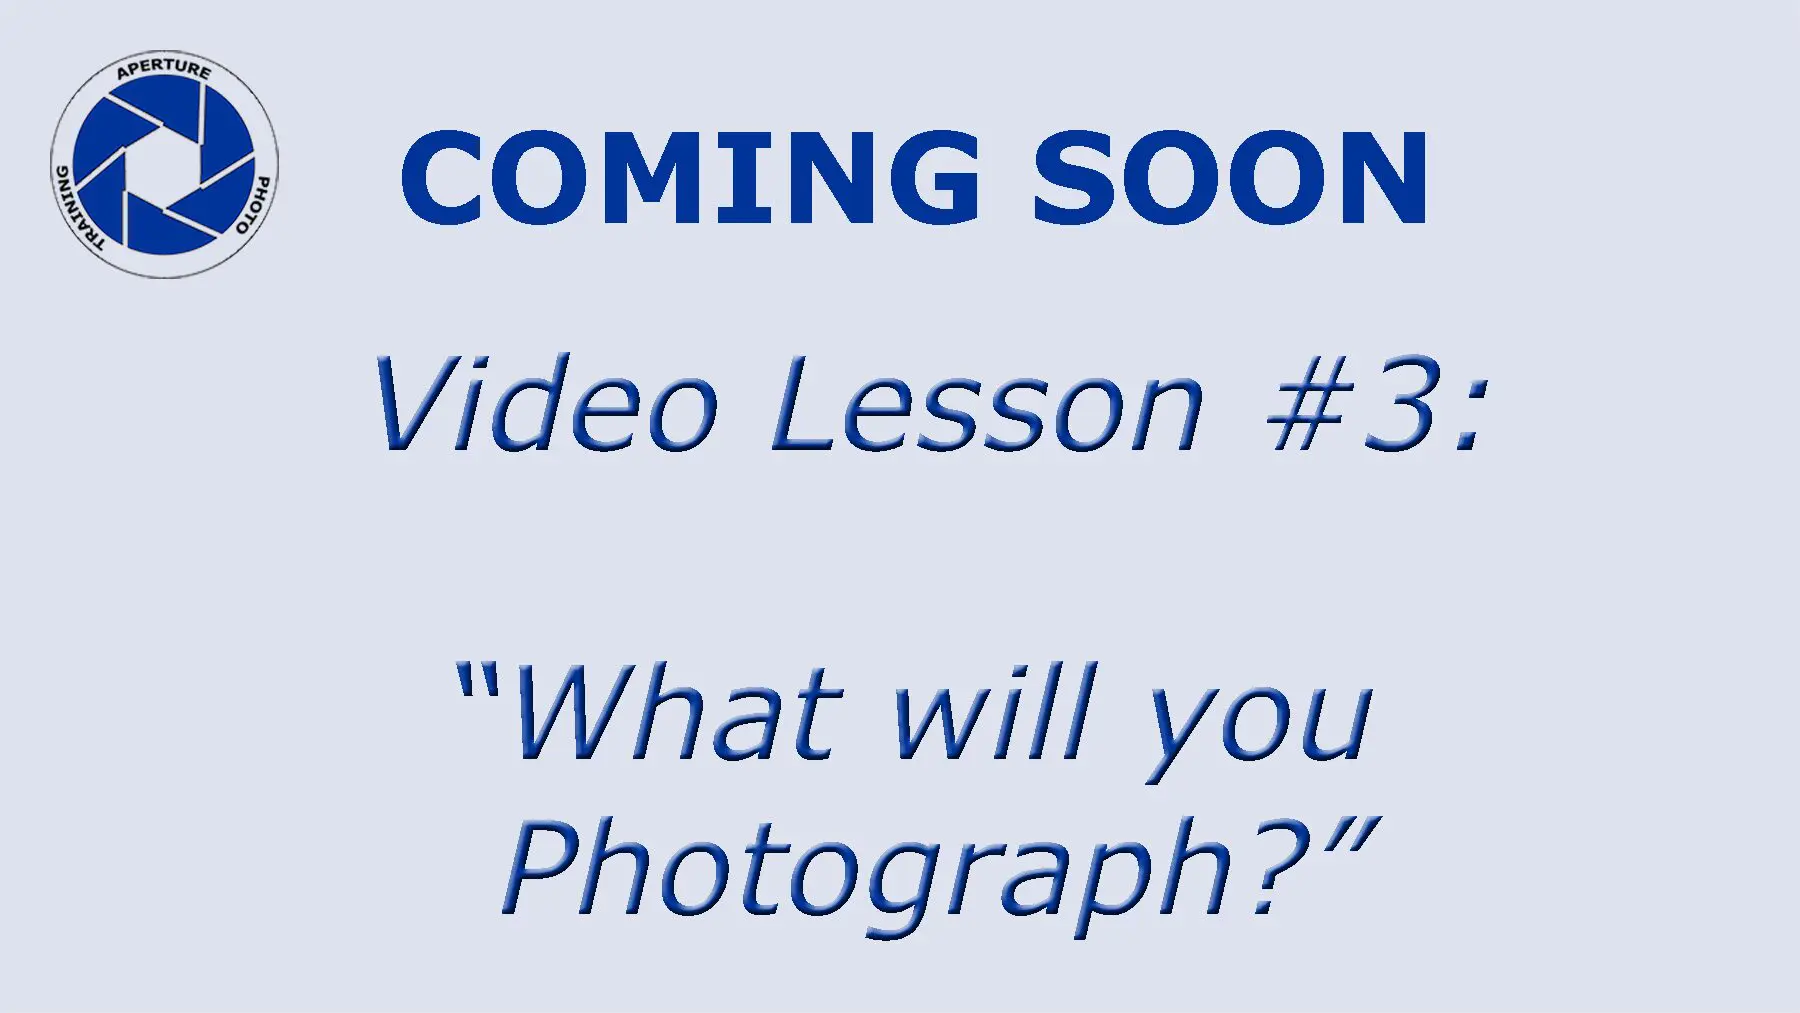 Text about a video lesson titled “What will your Photograph?”